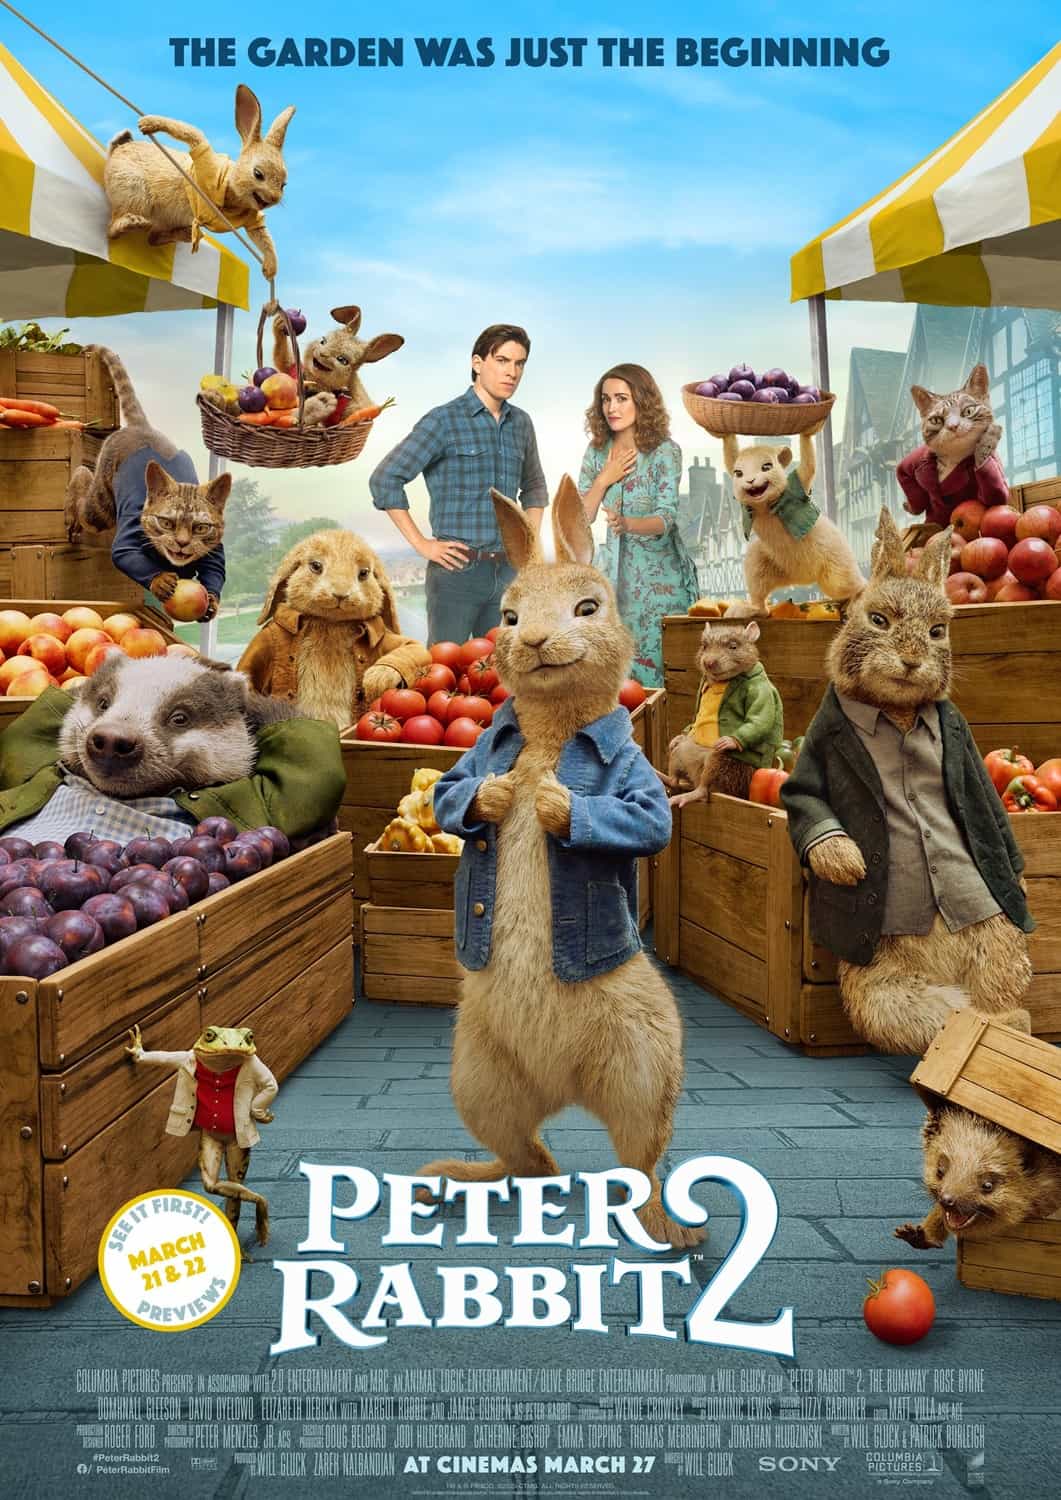 Peter Rabbit 2 is the top movie in the UK on the first day of the re-opening as cinemas doors open for the first time in 2021